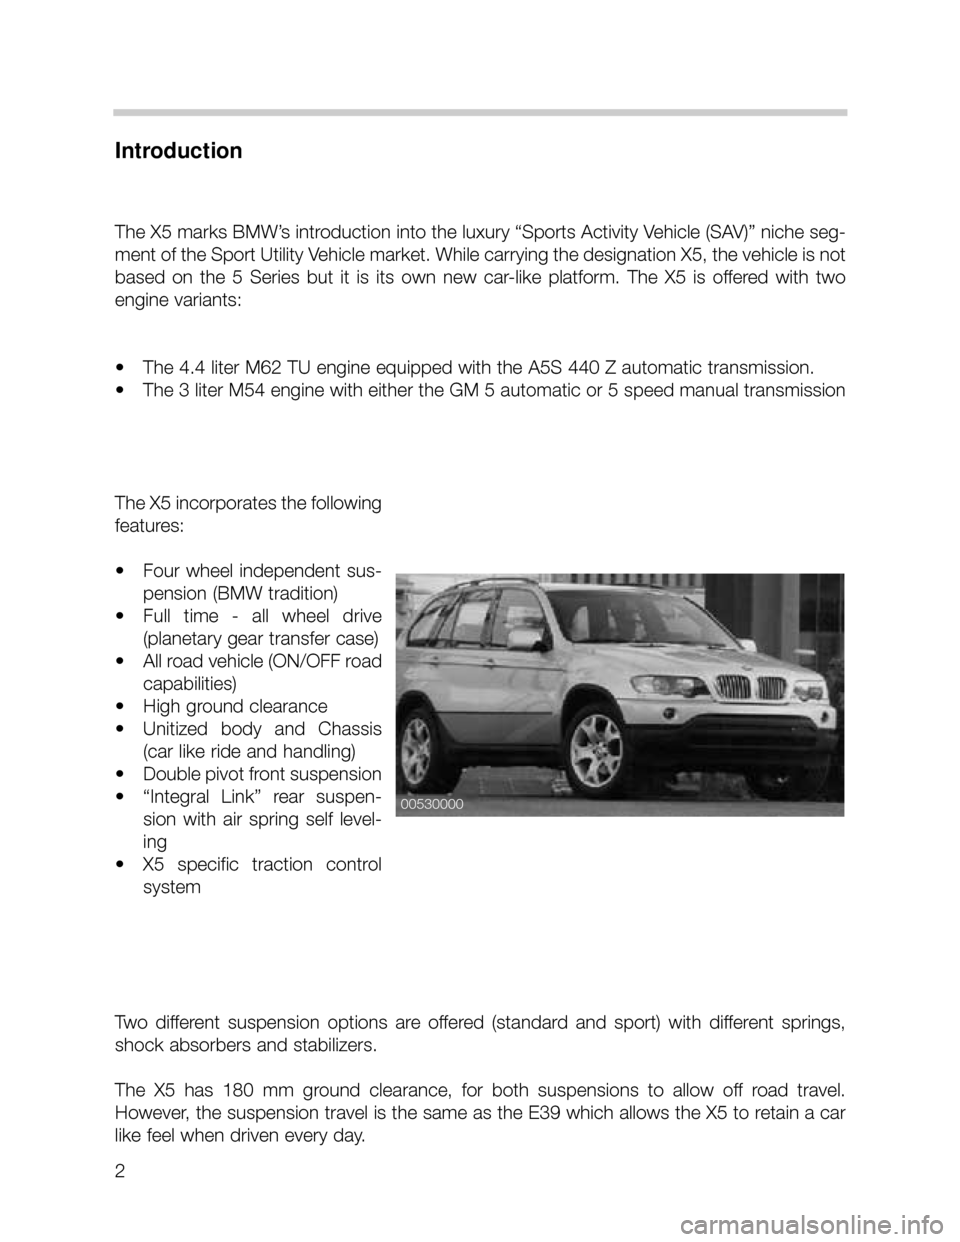 BMW X5 1999 E53 Workshop Manual 2
Introduction
The X5 marks BMW’s introduction into the luxury “Sports Activity Vehicle (SAV)” niche seg-
ment of the Sport Utility Vehicle market. While carrying the designation X5, the vehicle